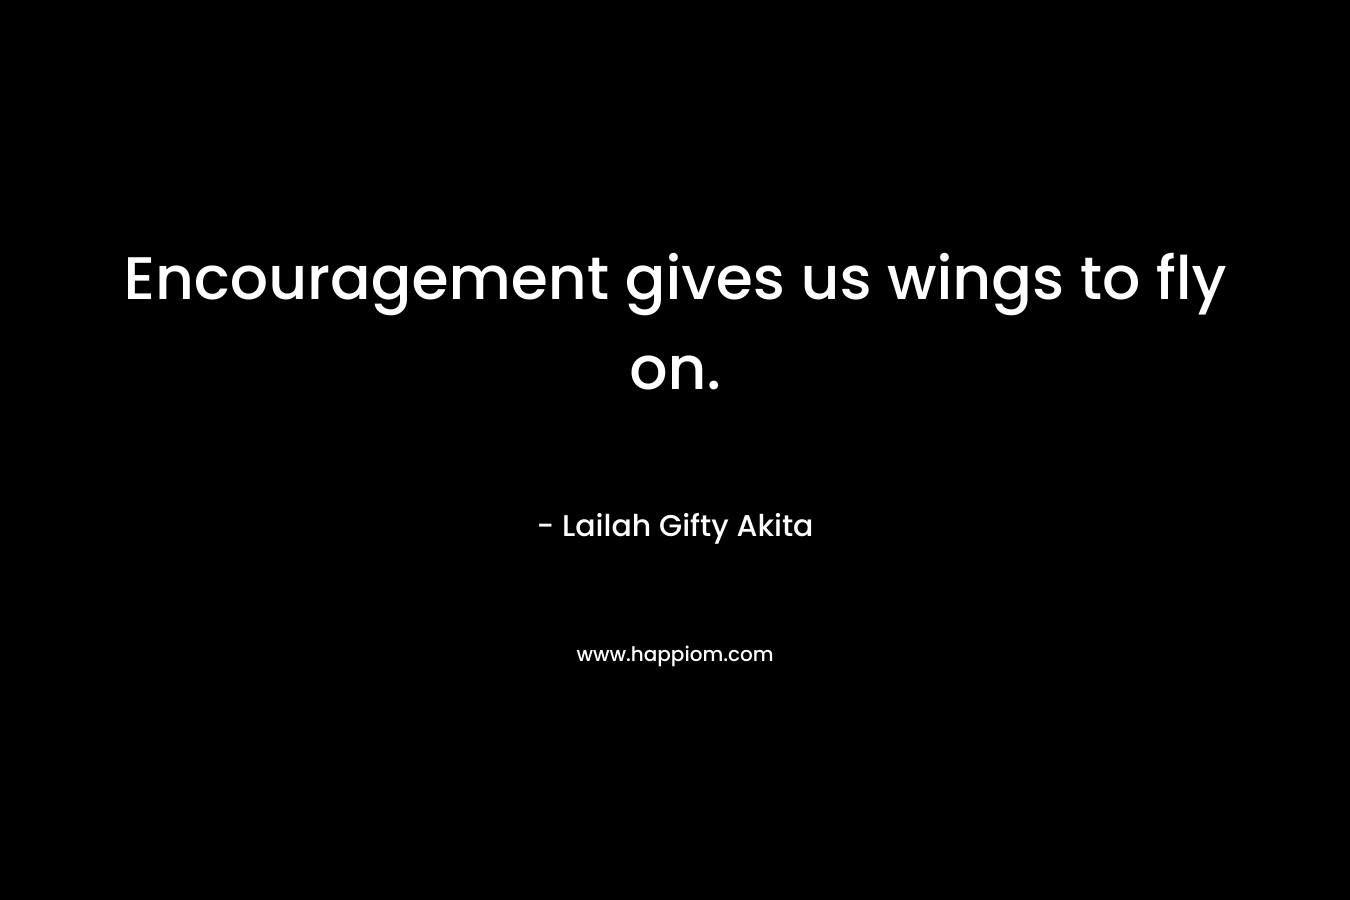 Encouragement gives us wings to fly on.